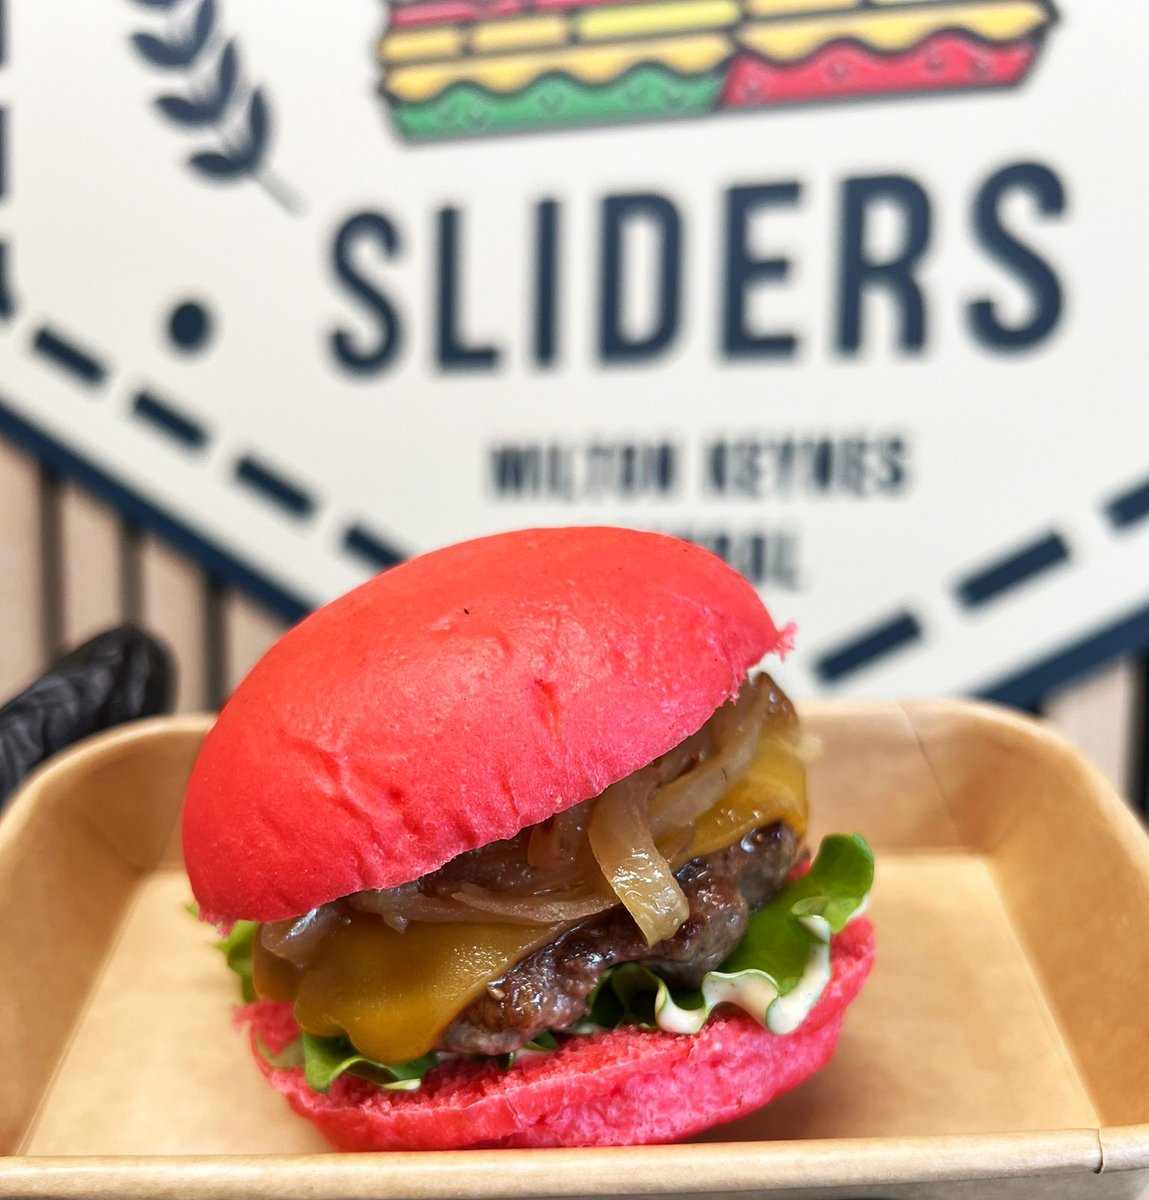 House of Sliders has opened @midsummer_place offering an array of miniature burger sliders in different colours, fillings and flavours - that are not just a treat for the taste buds but a feast for the eyes! 🍔😋 #miltonkeynes Find out more: destinationmiltonkeynes.co.uk/news/midsummer…